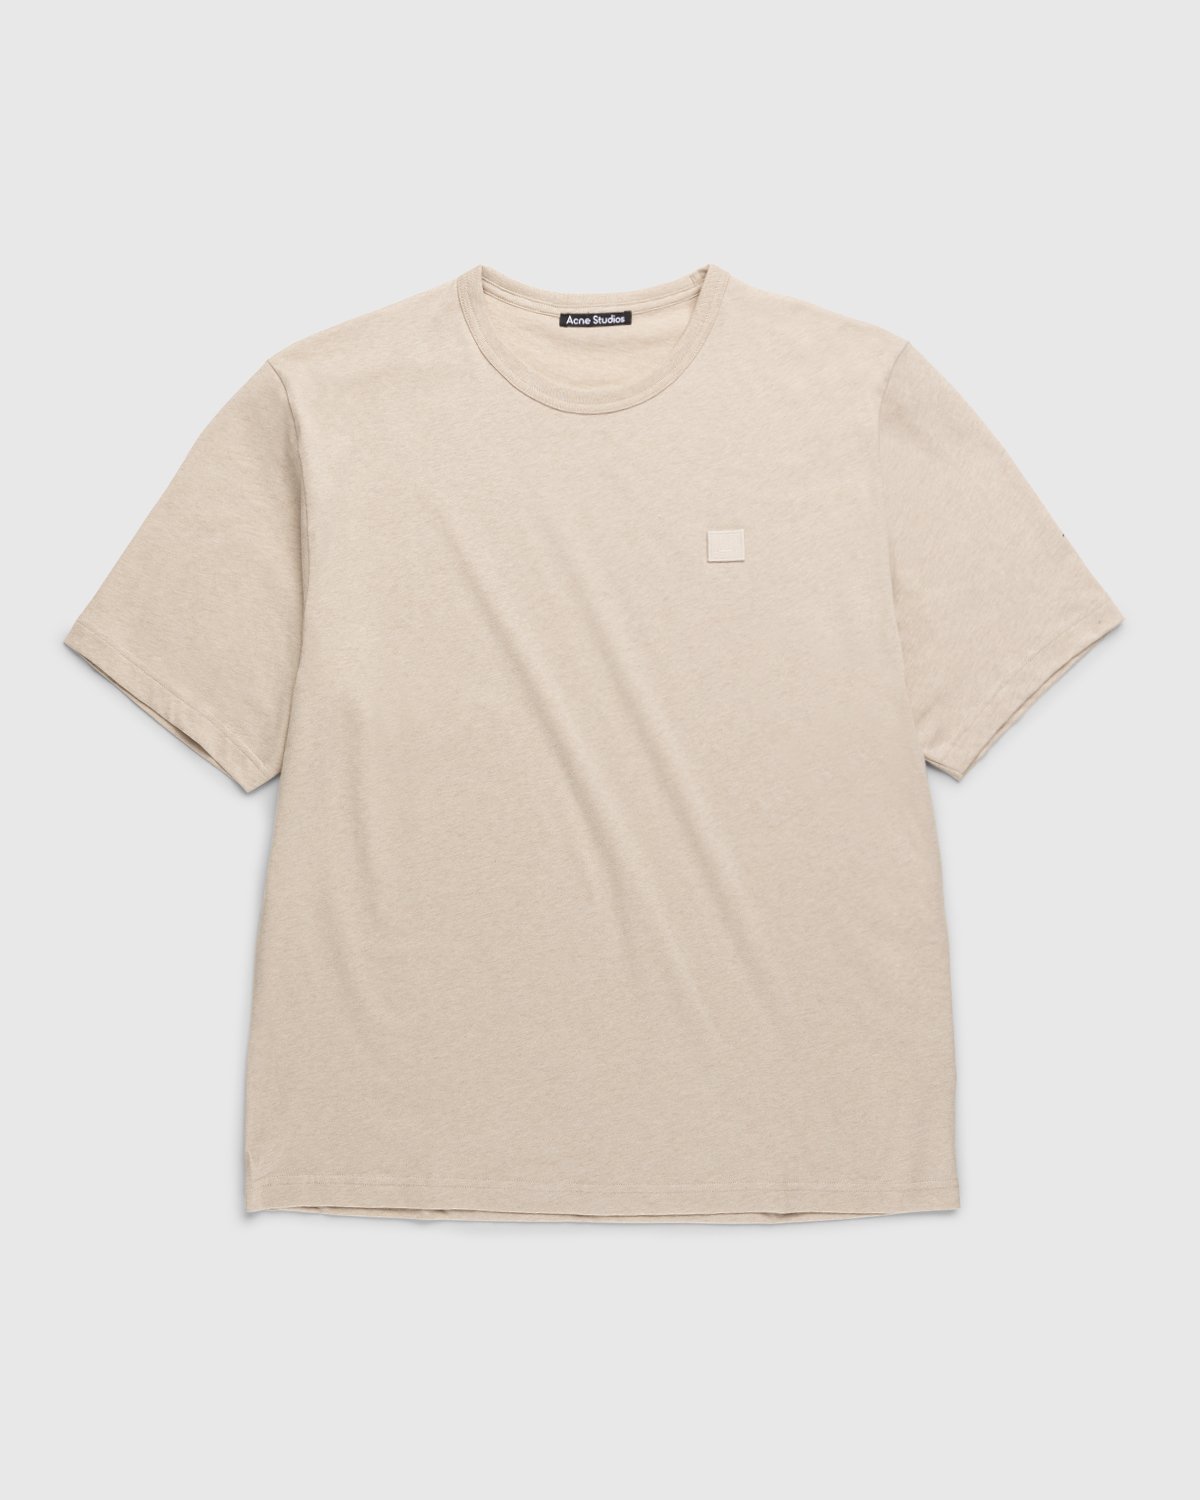 Acne Studios - Relaxed Fit T-Shirt Oatmeal Melange - Clothing - Beige - Image 1